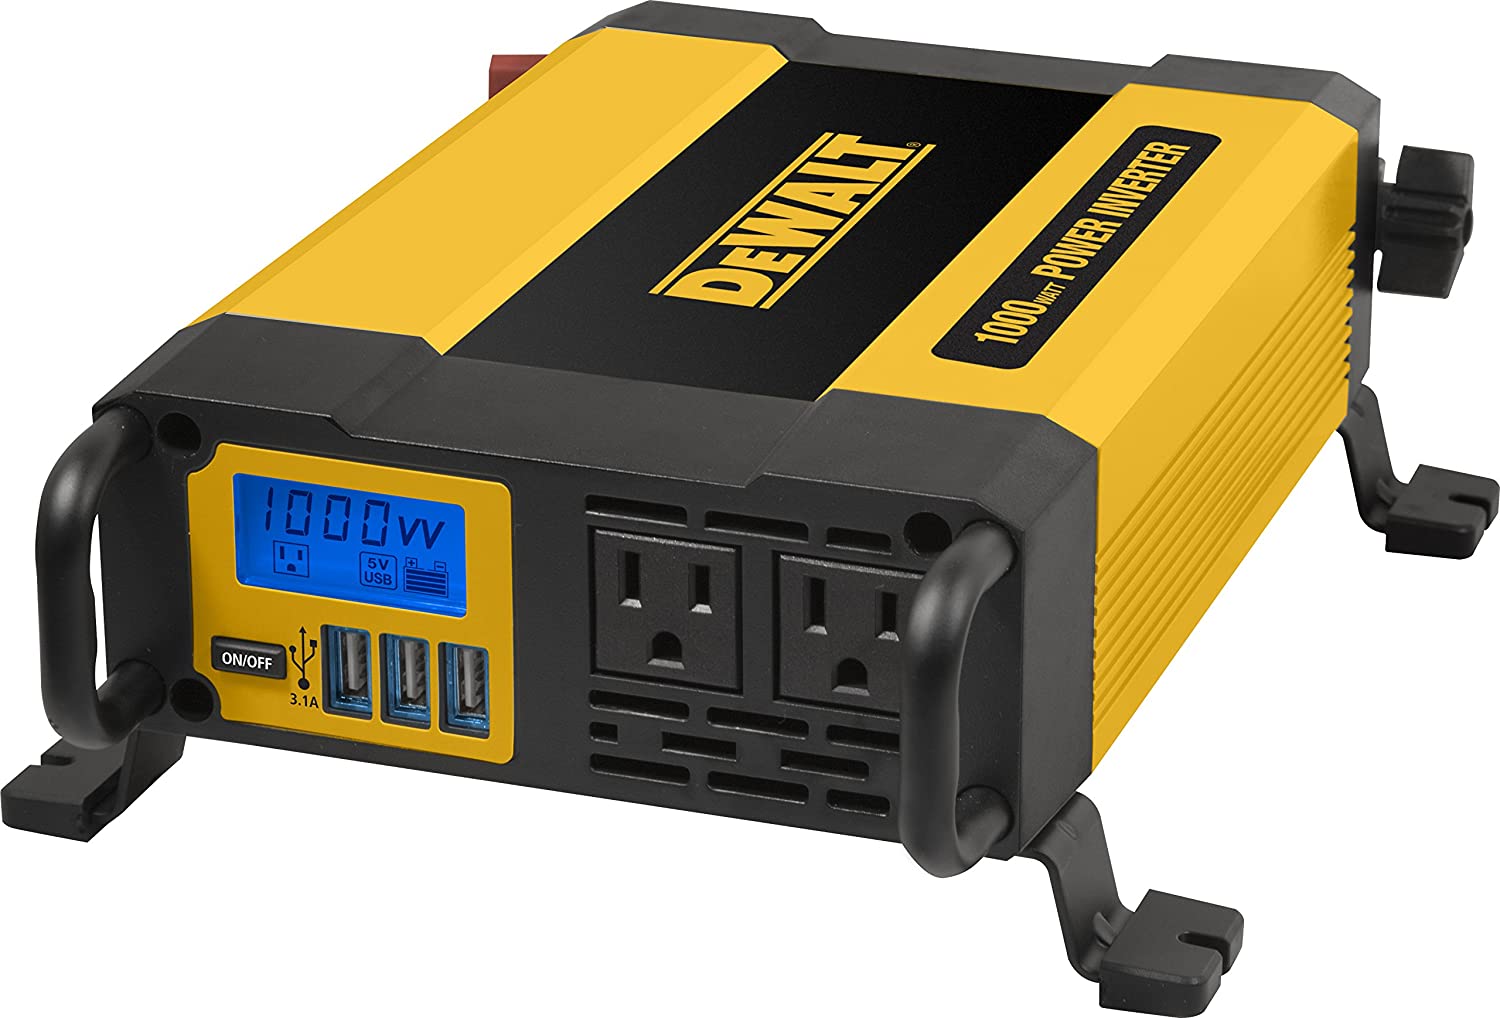 DEWALT DXAEPI1000 Power Inverter 1000W Car Converter with LCD Display: Dual  120V AC Outlets, 3.1A USB Ports, 12V DC Adapter, Battery Clamps